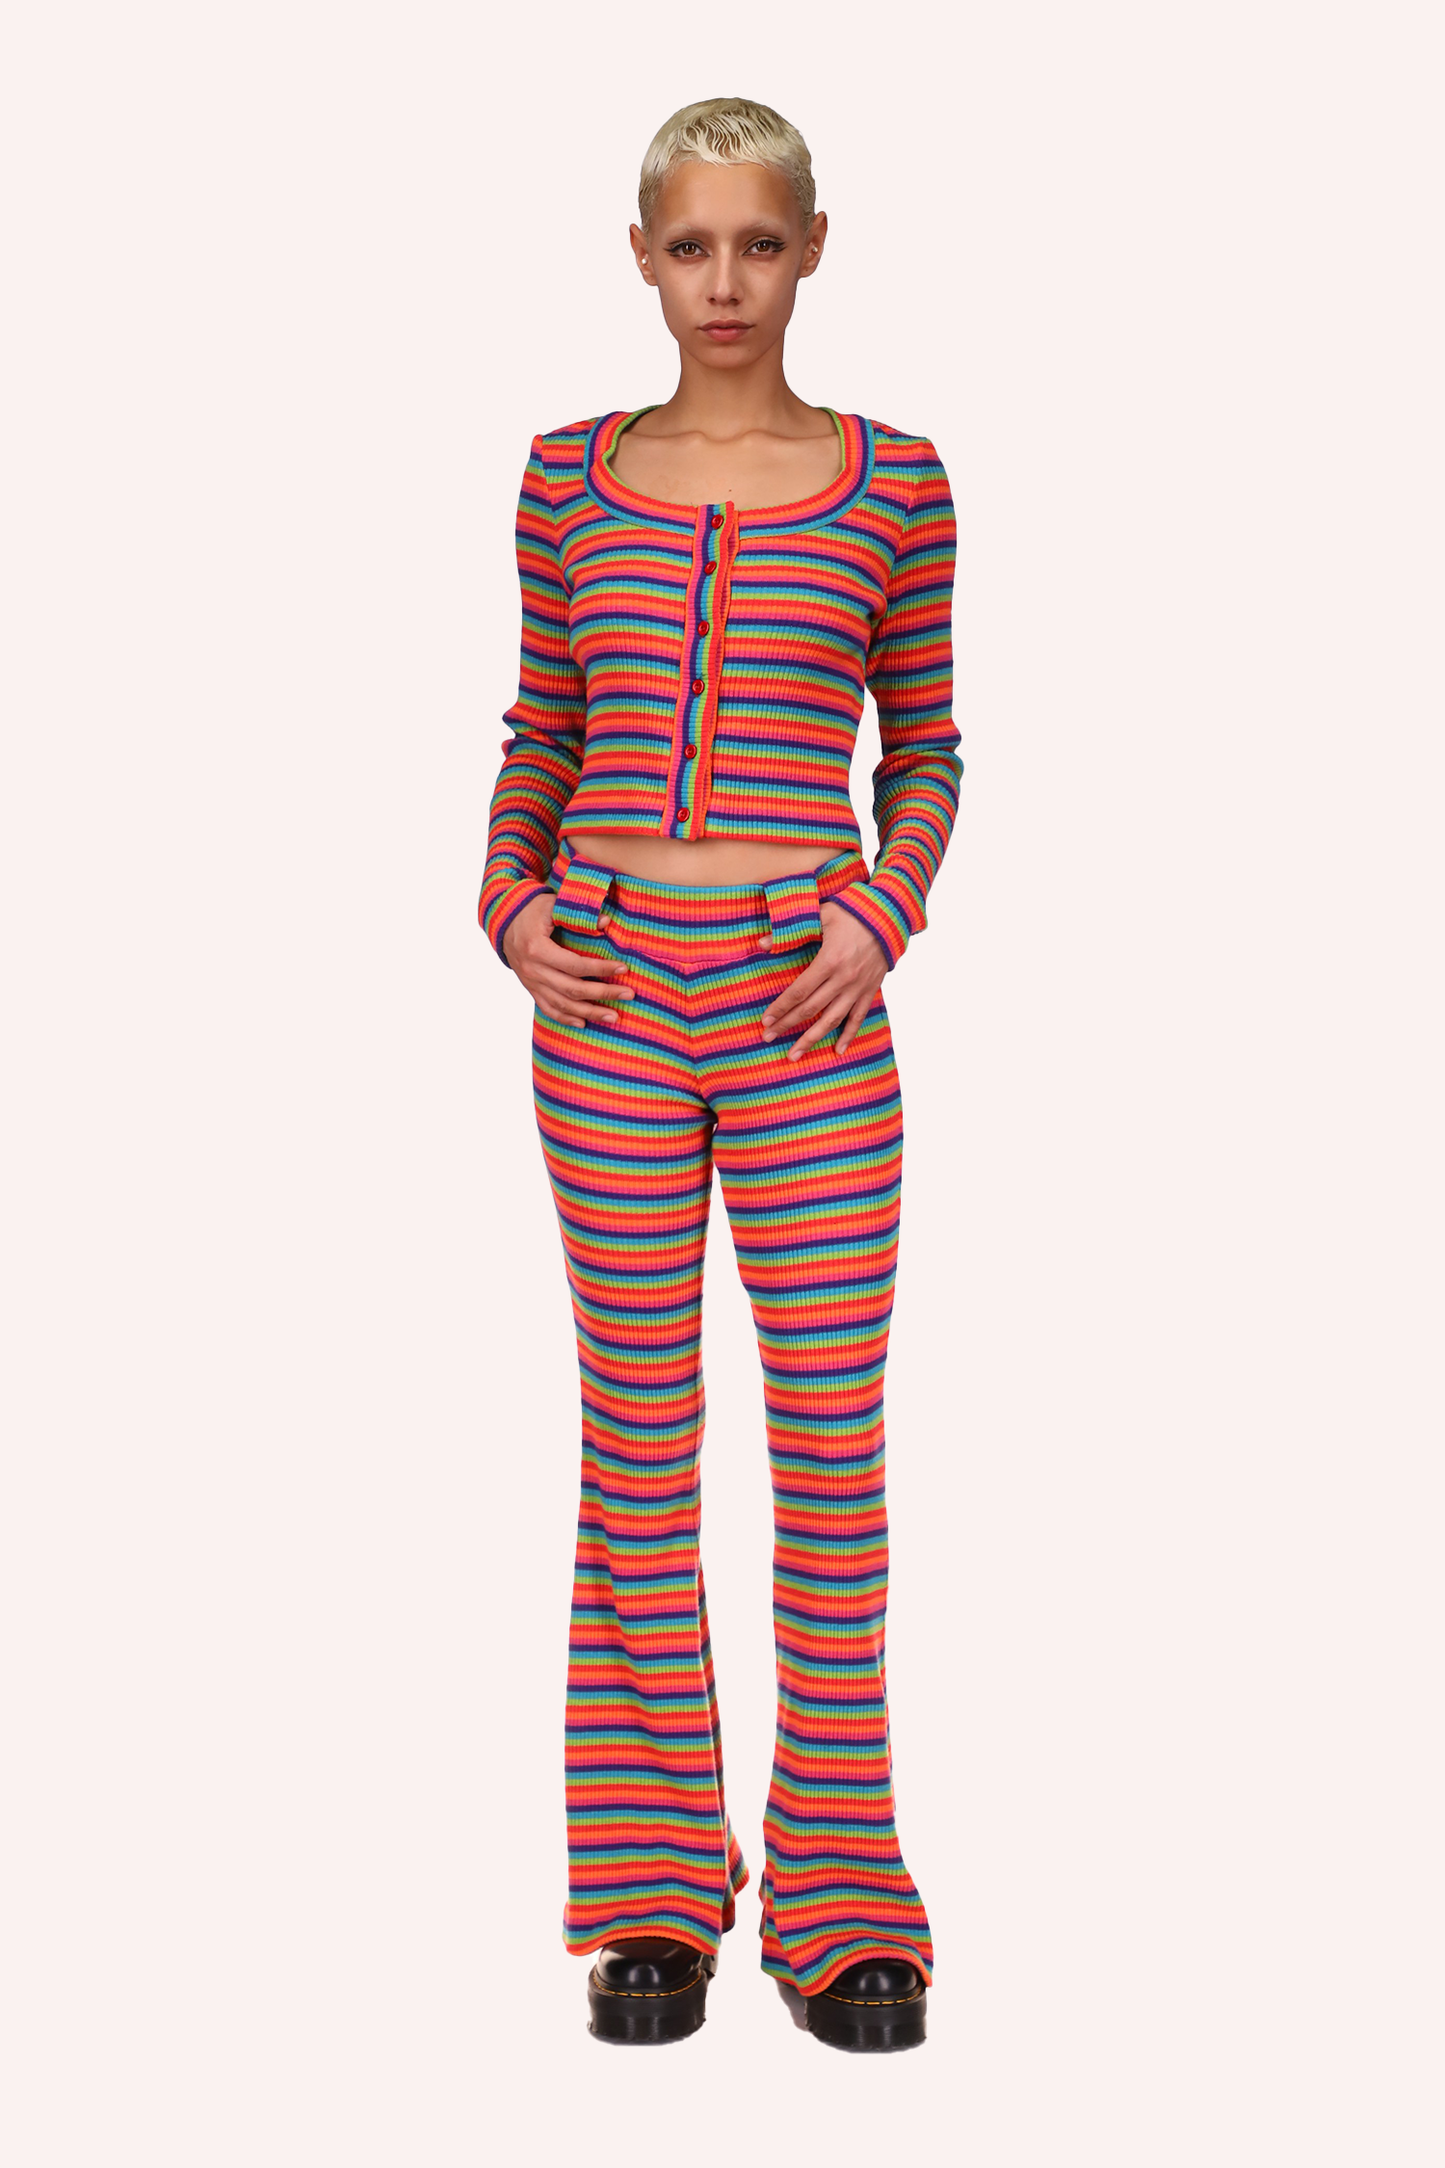 Rainbow Stripe Sweater is a perfect attire with the Rainbow Stripe Pants